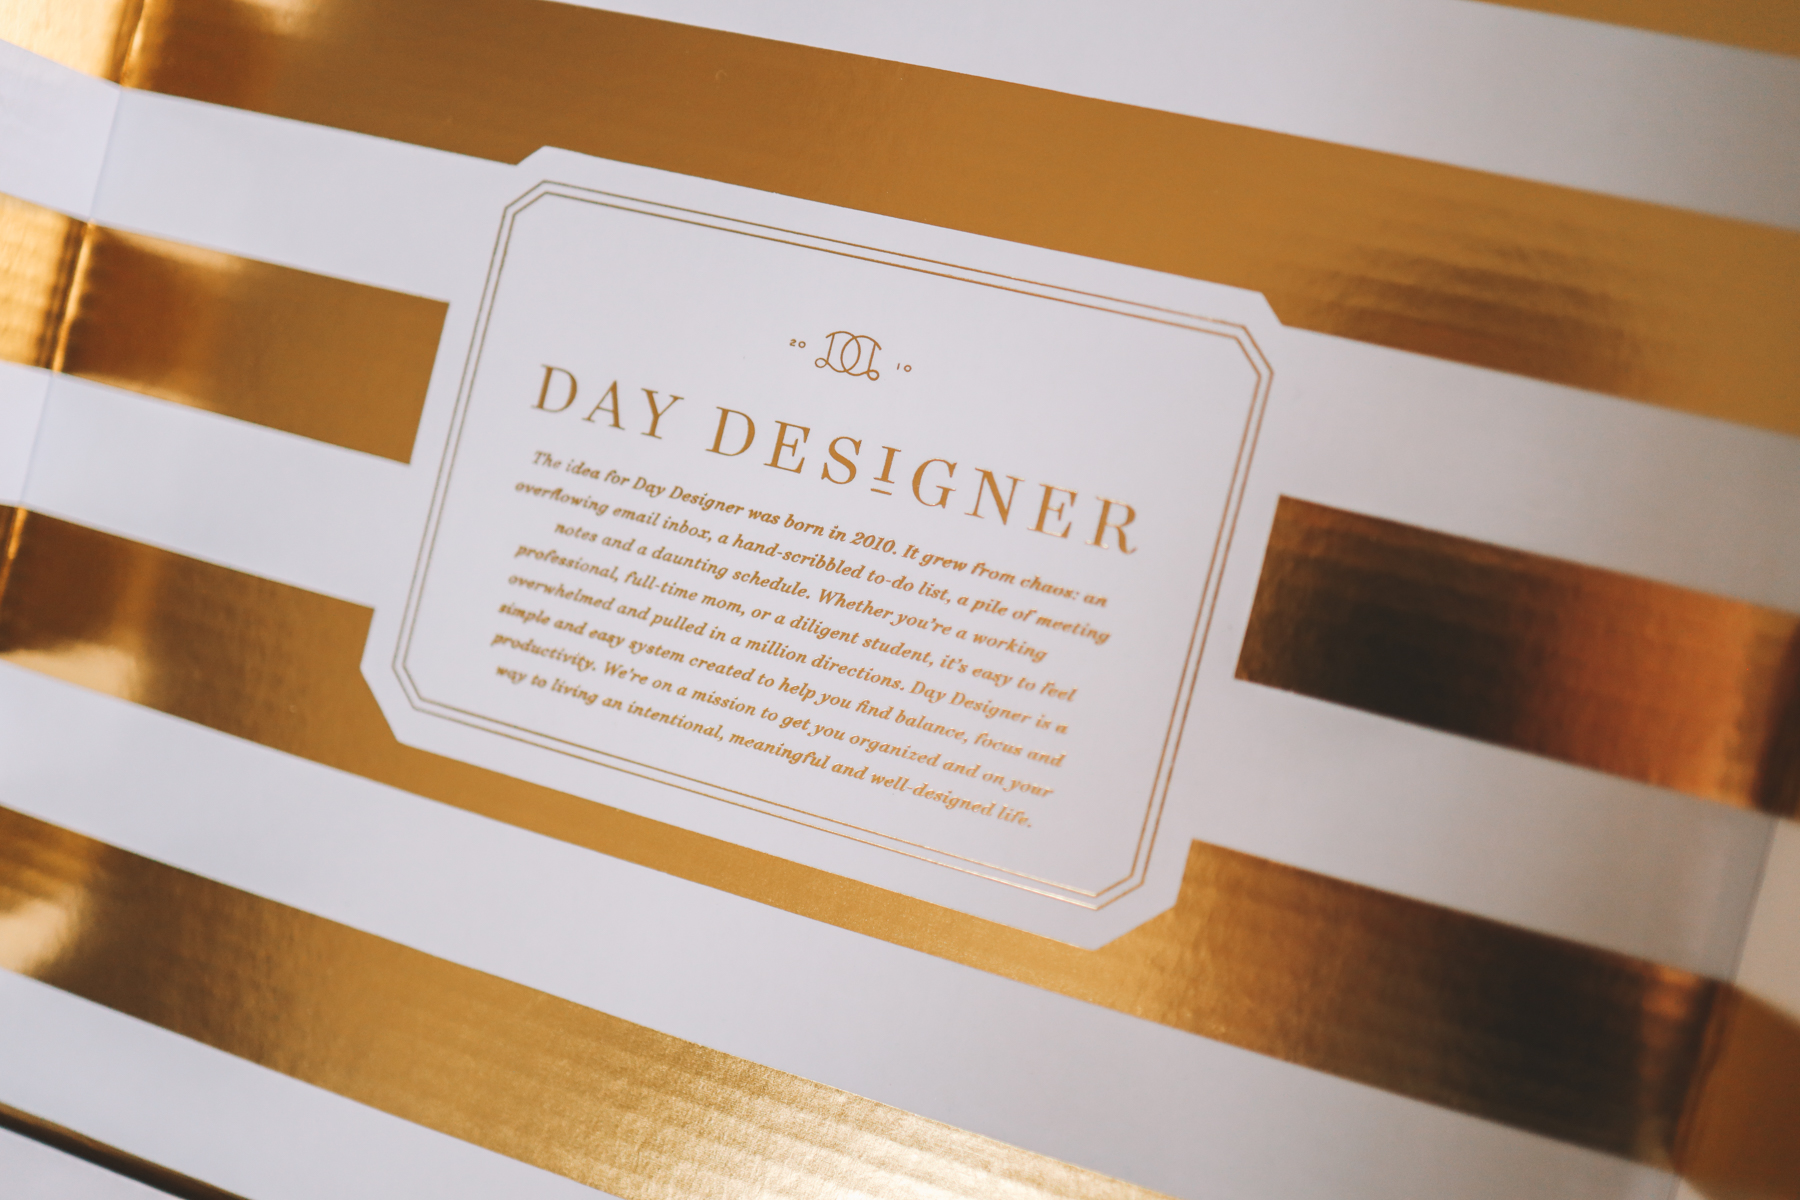 Day Designer Review - Kelly in the City